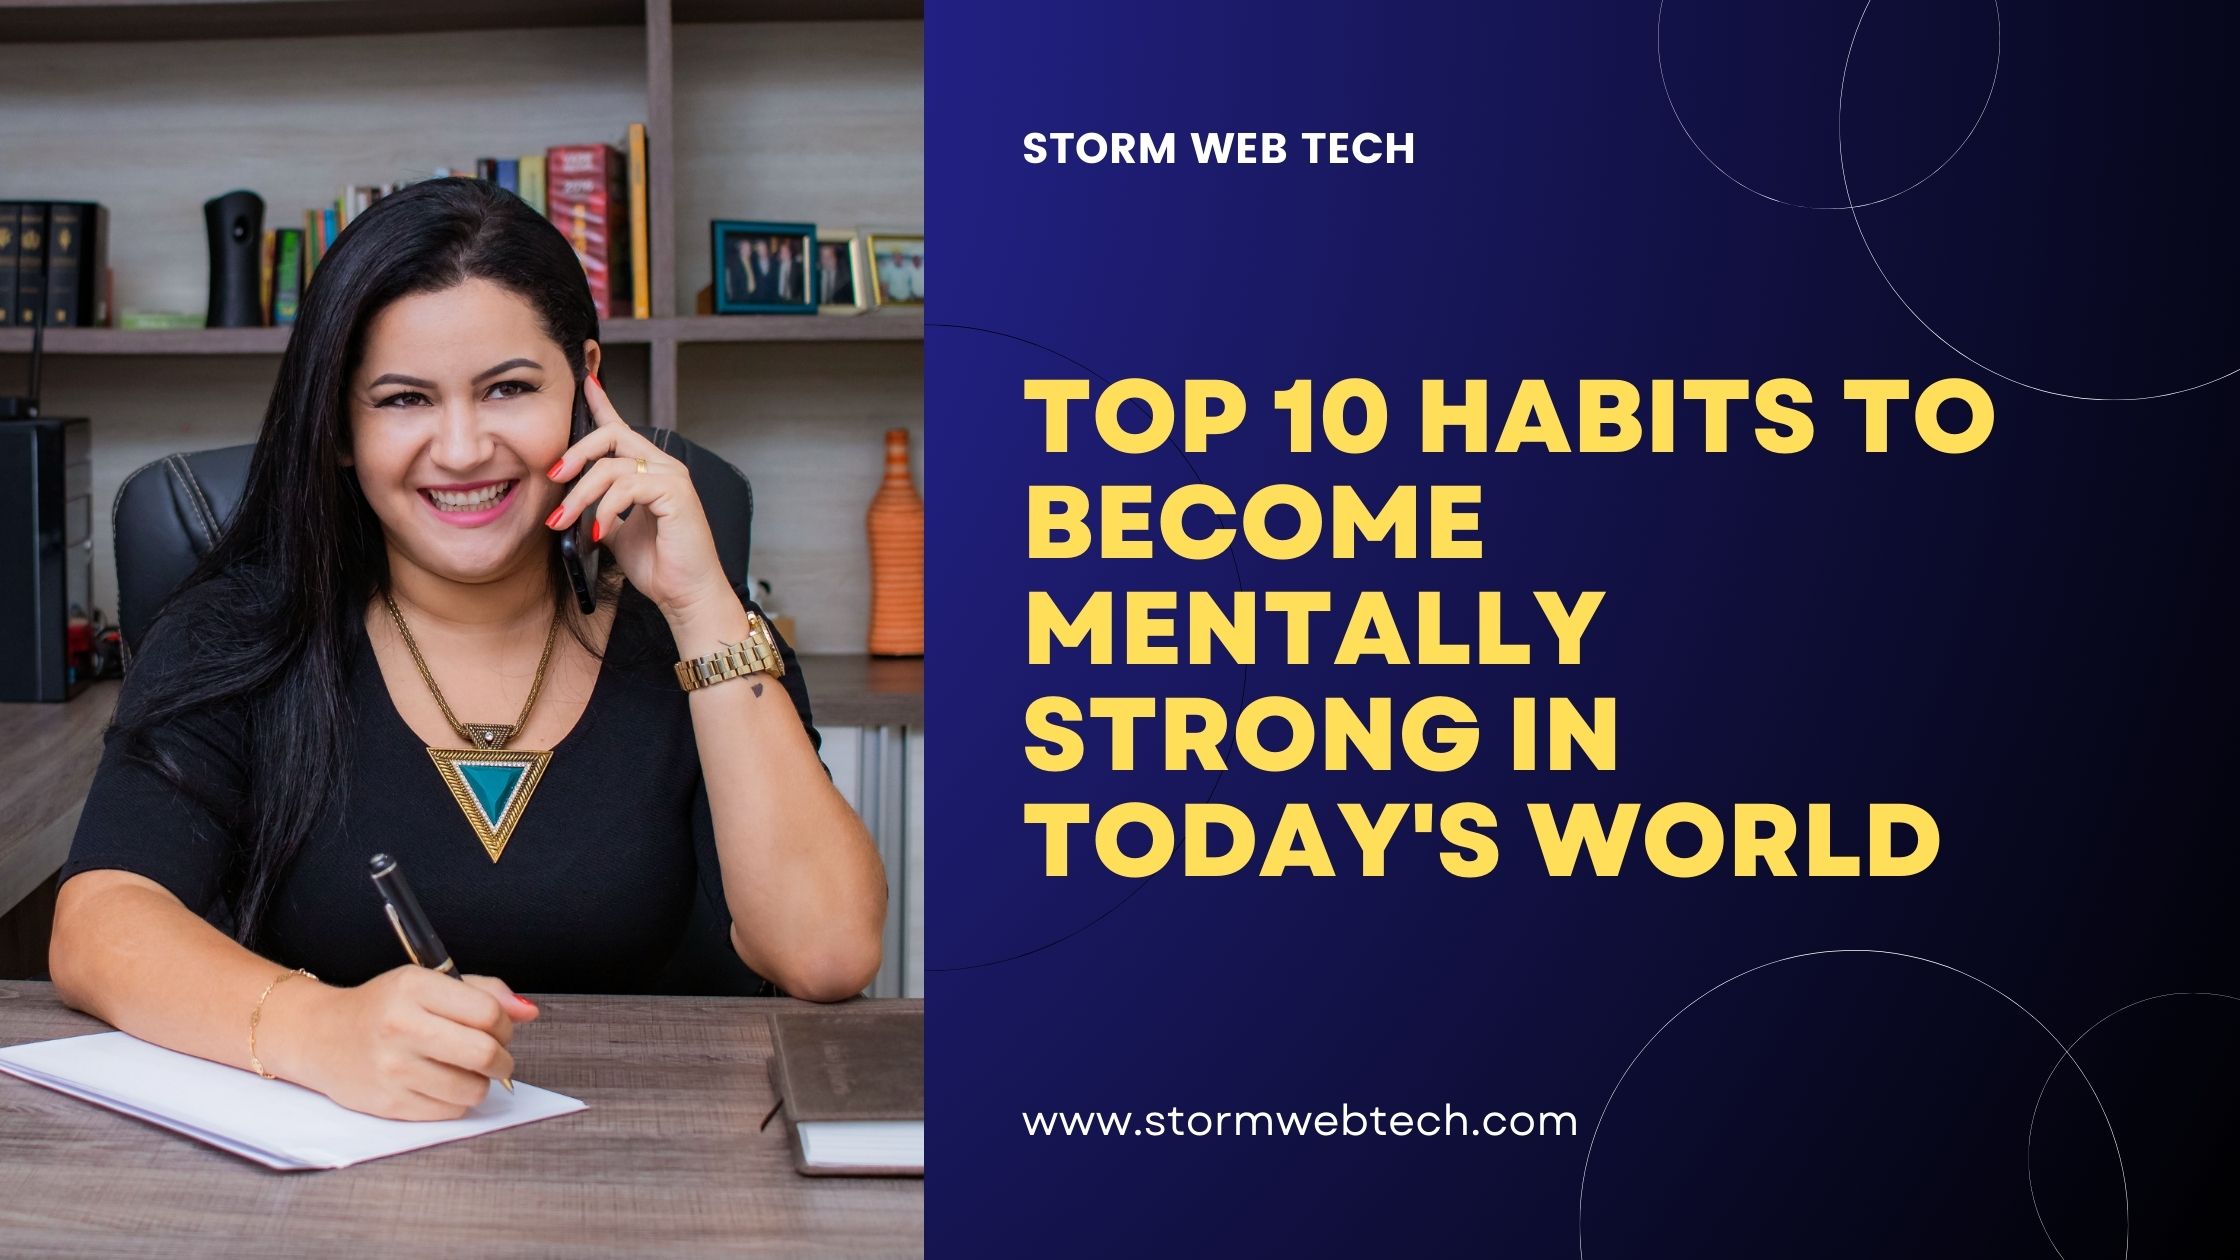 the Top 10 Habits to Become Mentally Strong that can help you become mentally strong and better equipped to navigate life's ups and downs